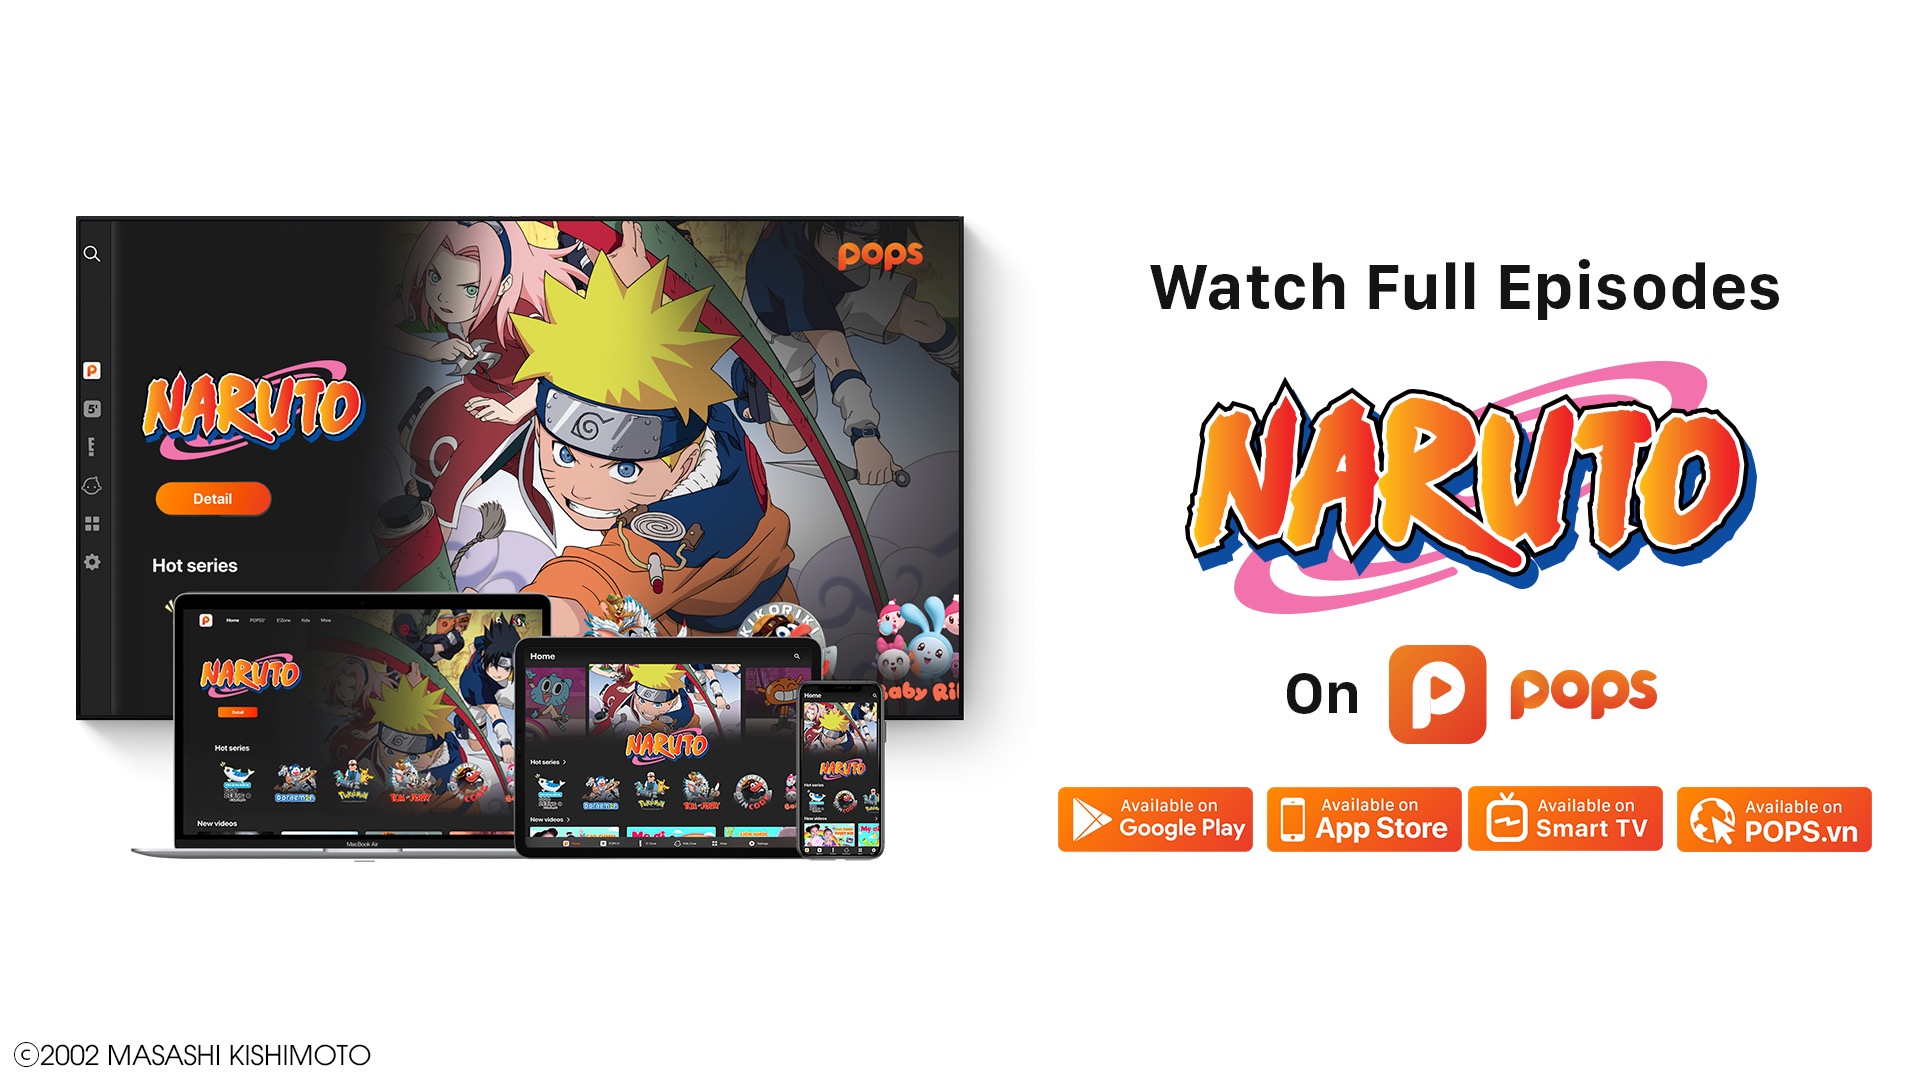 POPS forms a new partnership with TV Tokyo to Bring the Complete Naruto Anime Series to Vietnam Audiences across the POPS Platform.